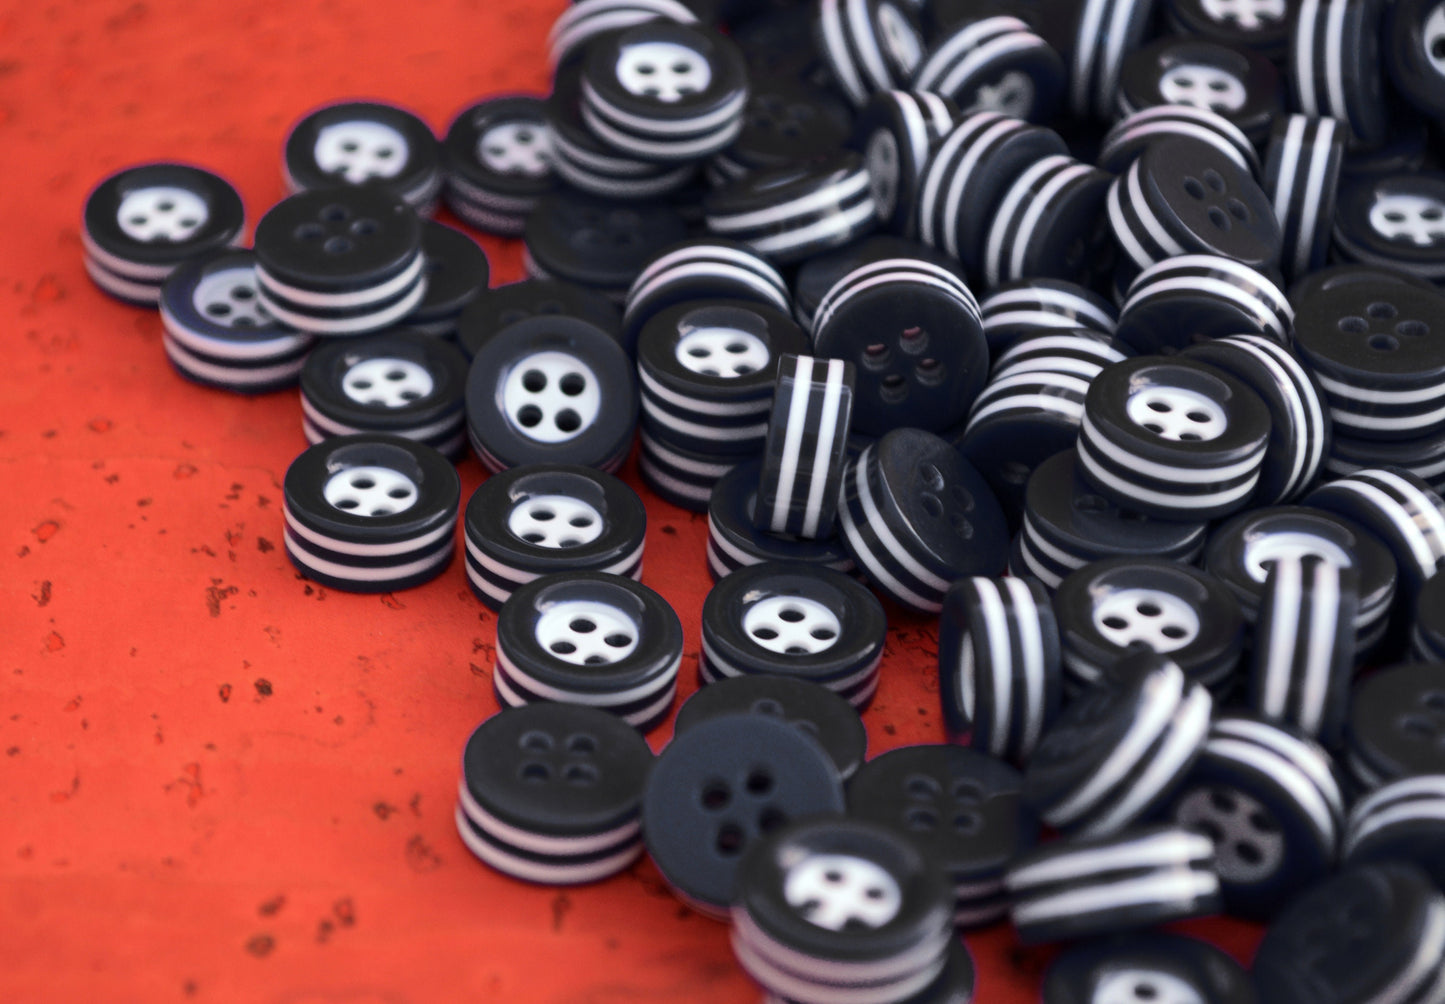 16 white and black STRIPED BUTTONS for 1 complete button down shirt - 5mm thick! - great quality - Made in ITALY